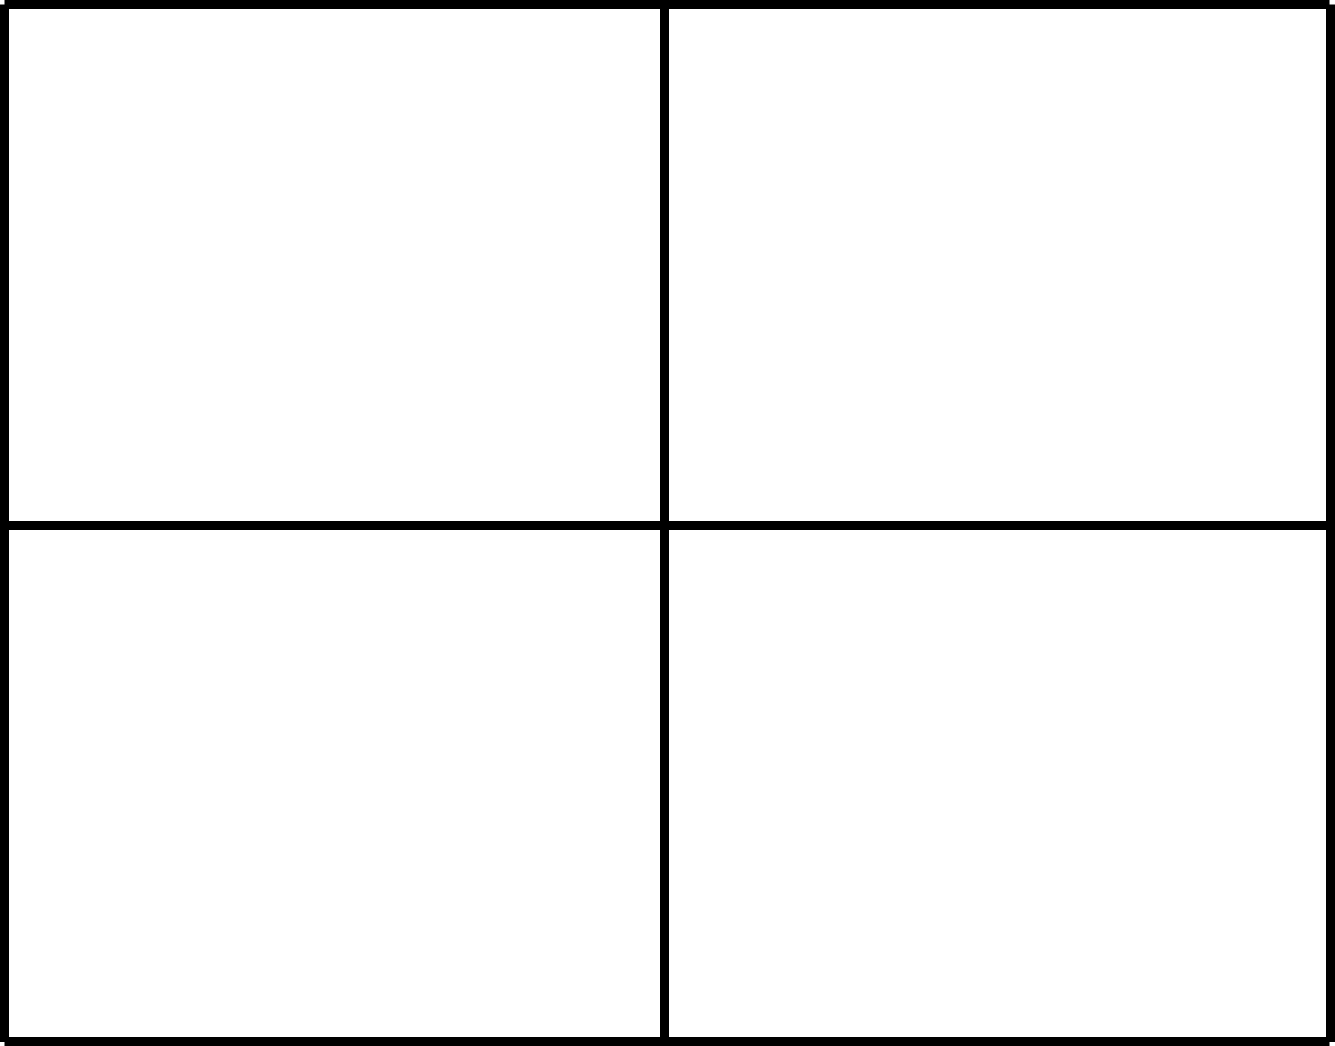 High Quality My Dolly Parton Challenge Blank Meme Template